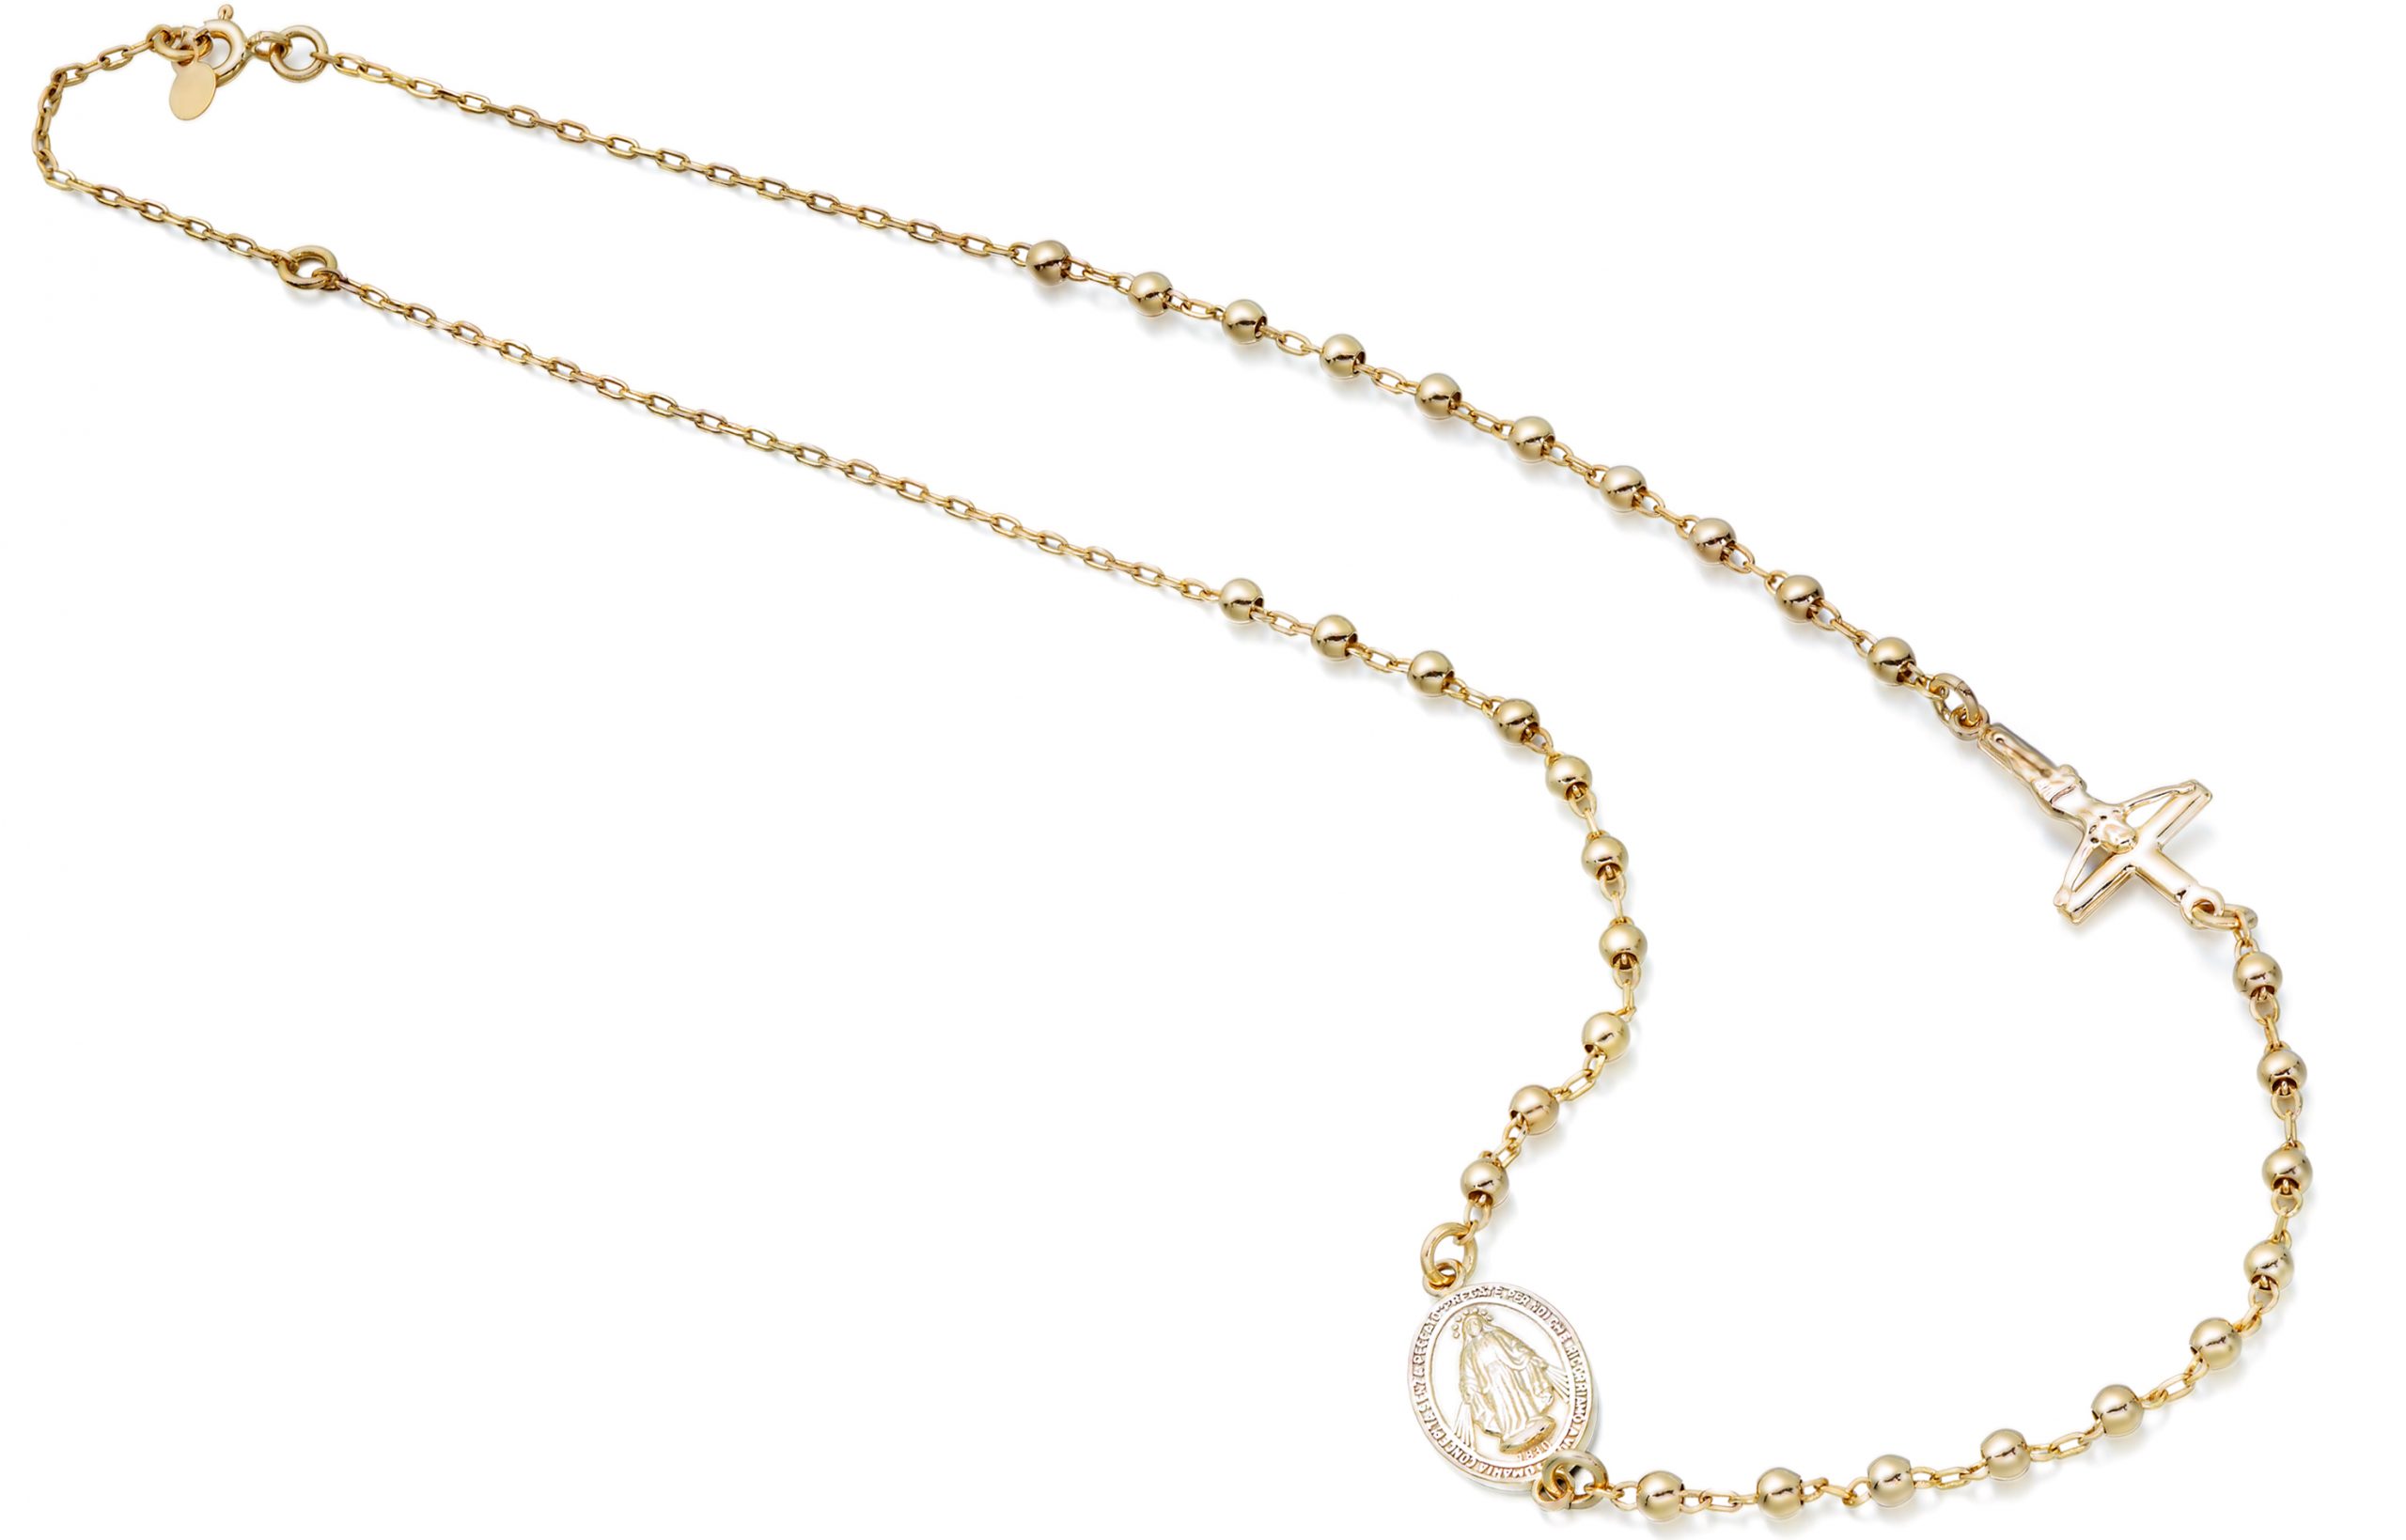 9Ct Yellow Gold Ladies' 16 Inches Rosary Necklet Necklace - C&S